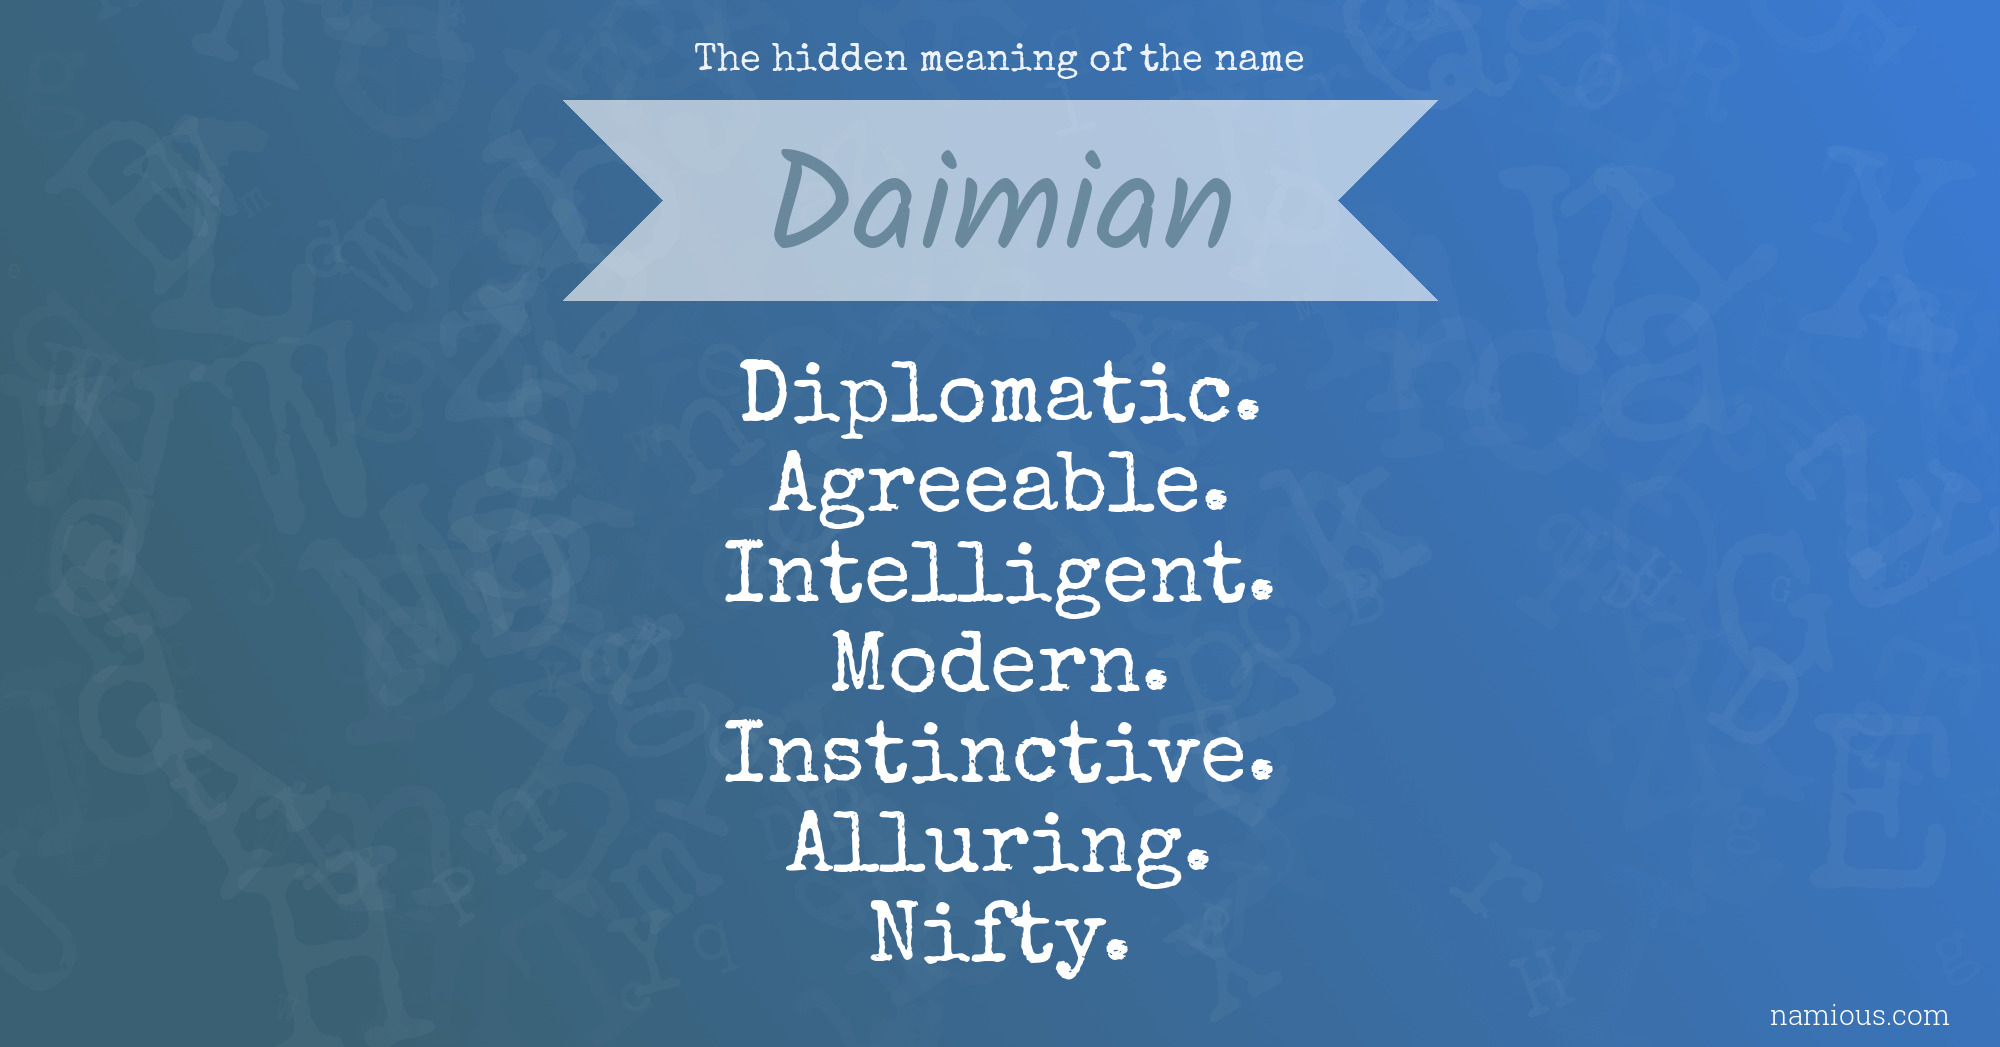 The hidden meaning of the name Daimian